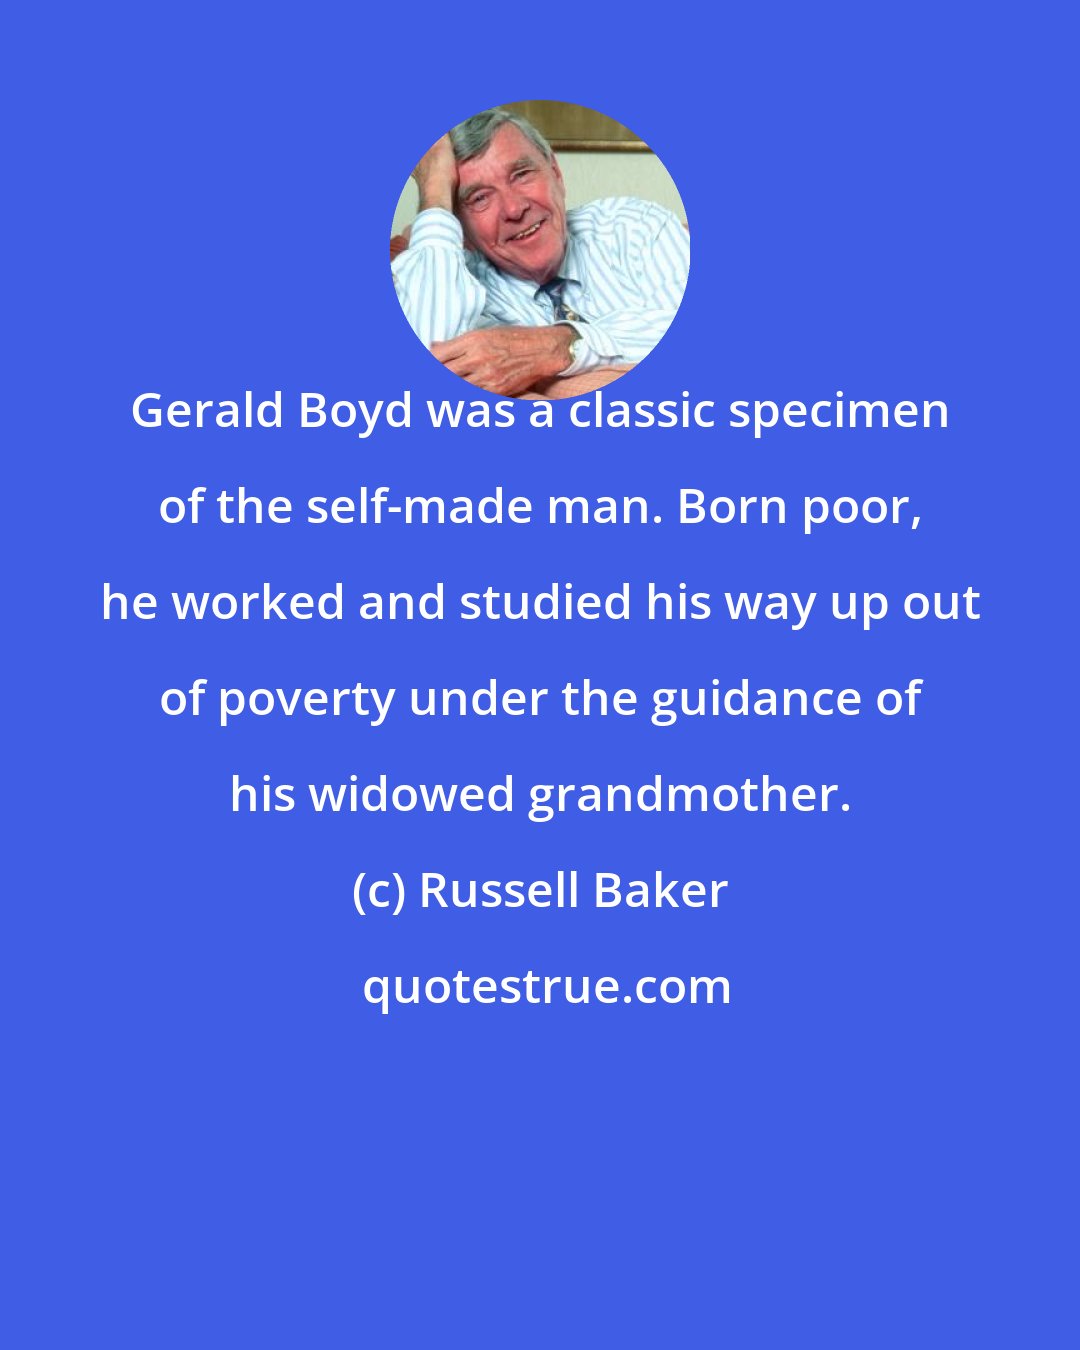 Russell Baker: Gerald Boyd was a classic specimen of the self-made man. Born poor, he worked and studied his way up out of poverty under the guidance of his widowed grandmother.